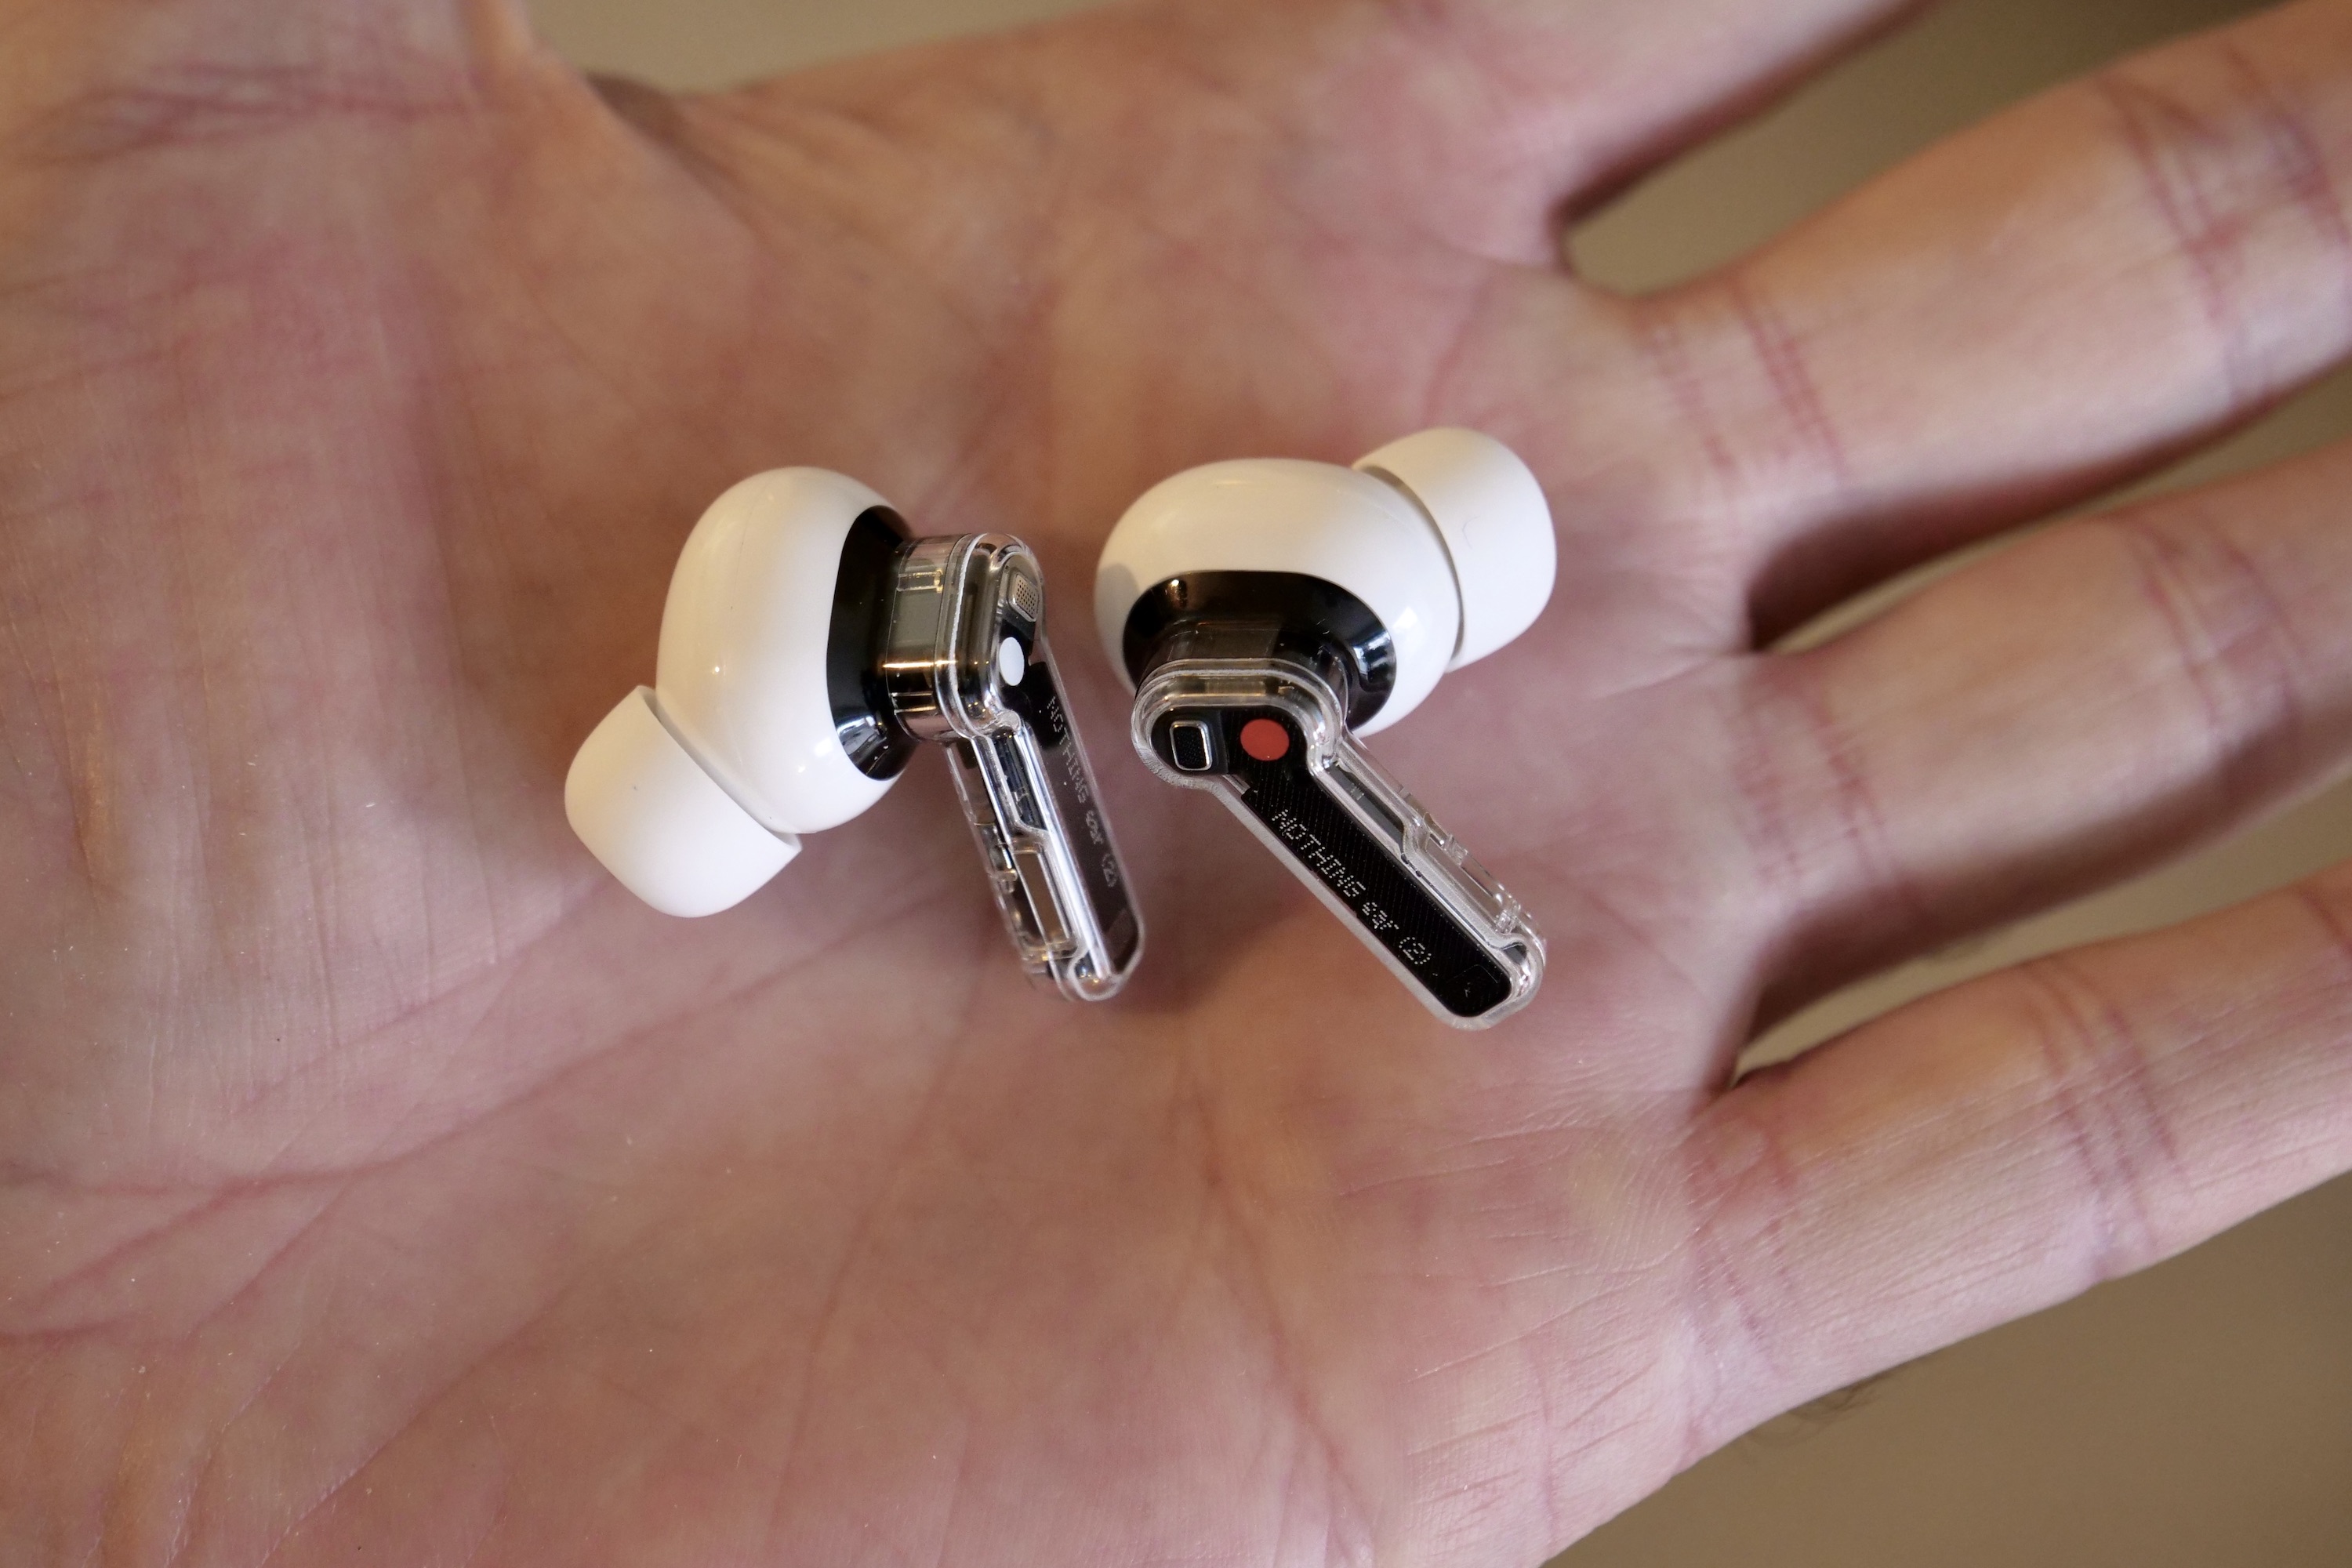 Nothing's Ear 2 buds are available starting today